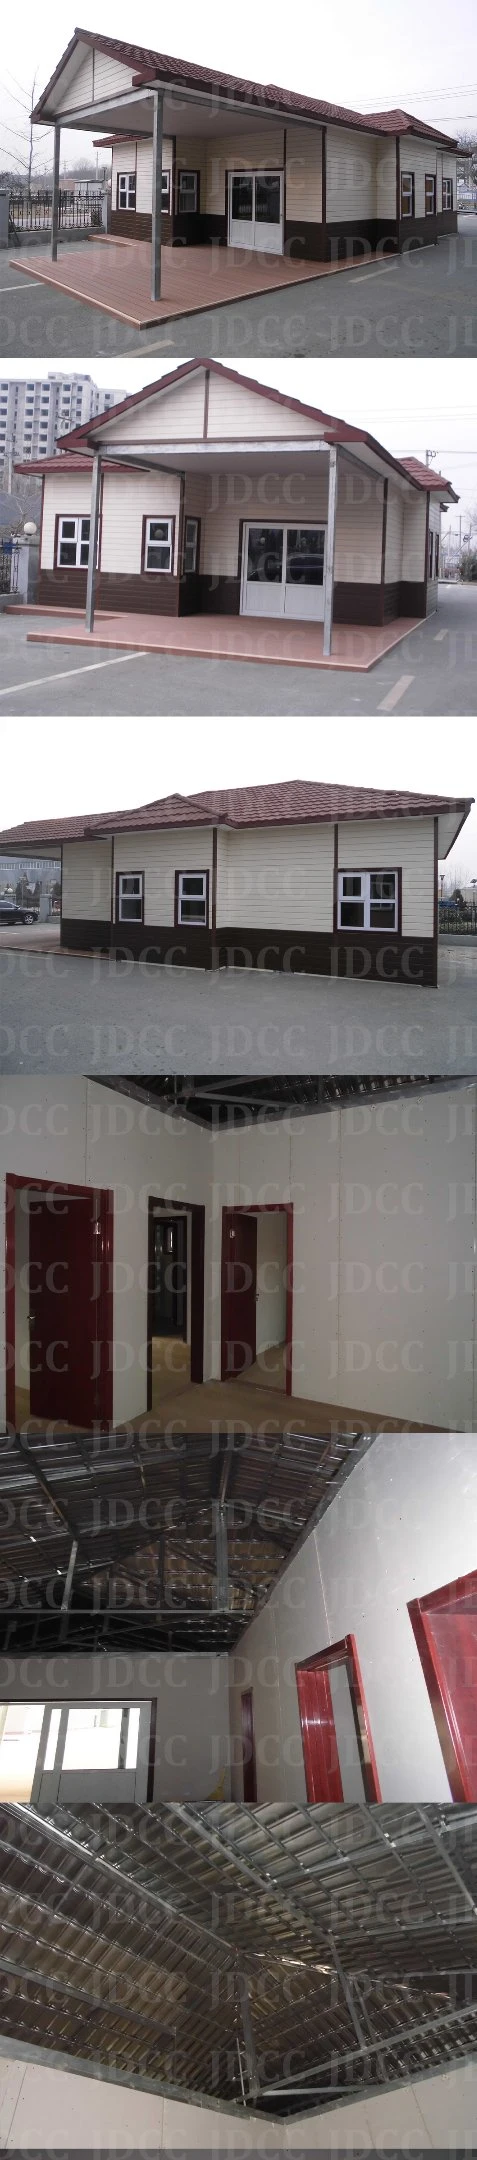 Low Cost Easy Install Prefabricated Prefab Portable Modular Mobile Expandable Luxury Shipping Container Light Steel Poultry Chicken Building House